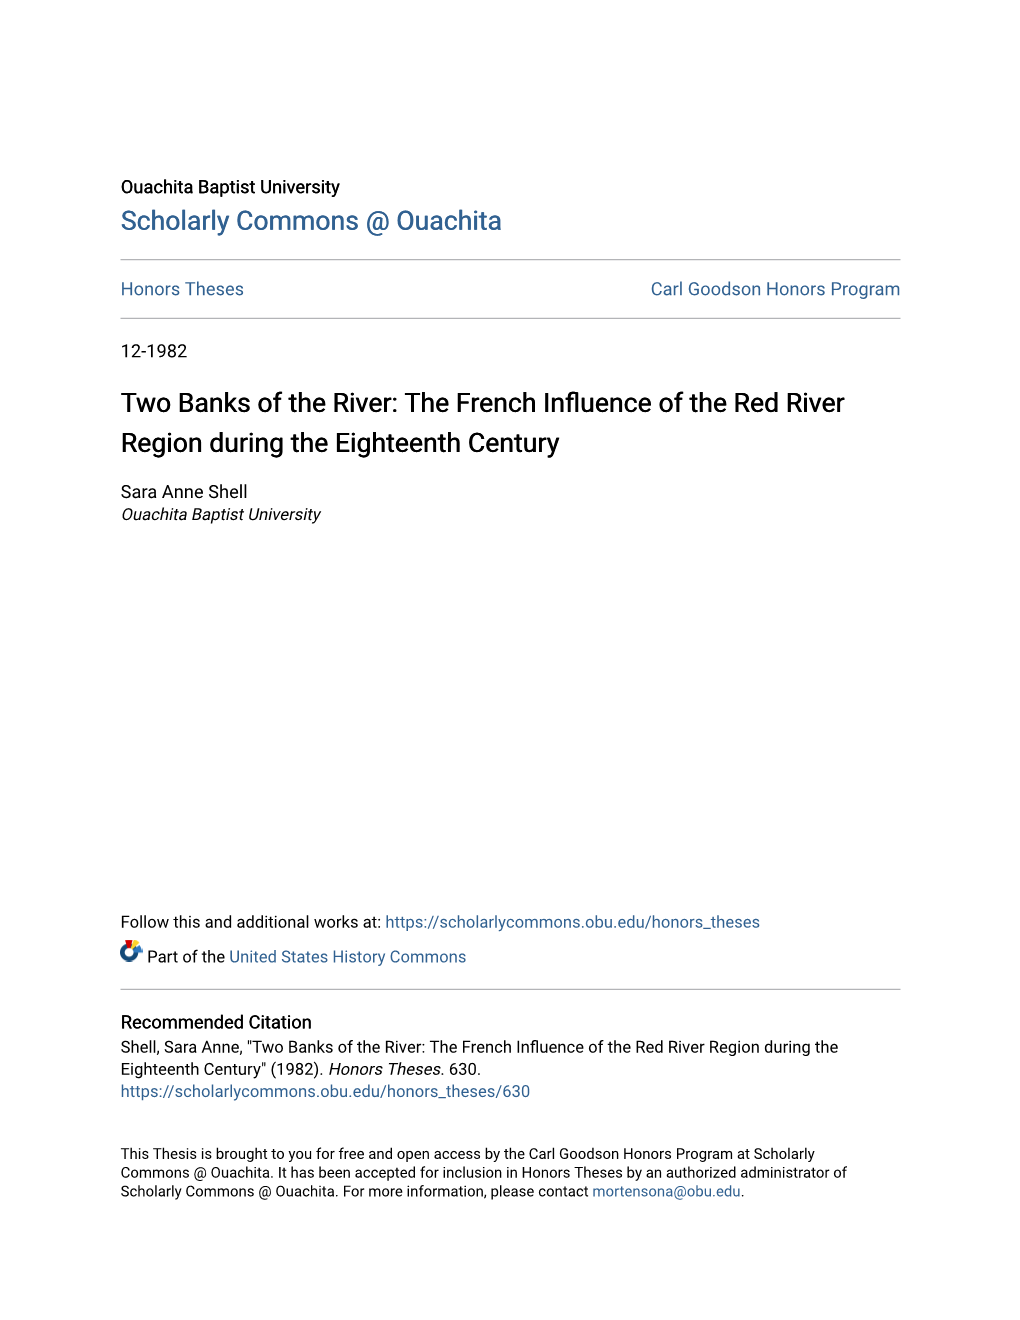 Two Banks of the River: the French Influence of the Red River Region During the Eighteenth Century